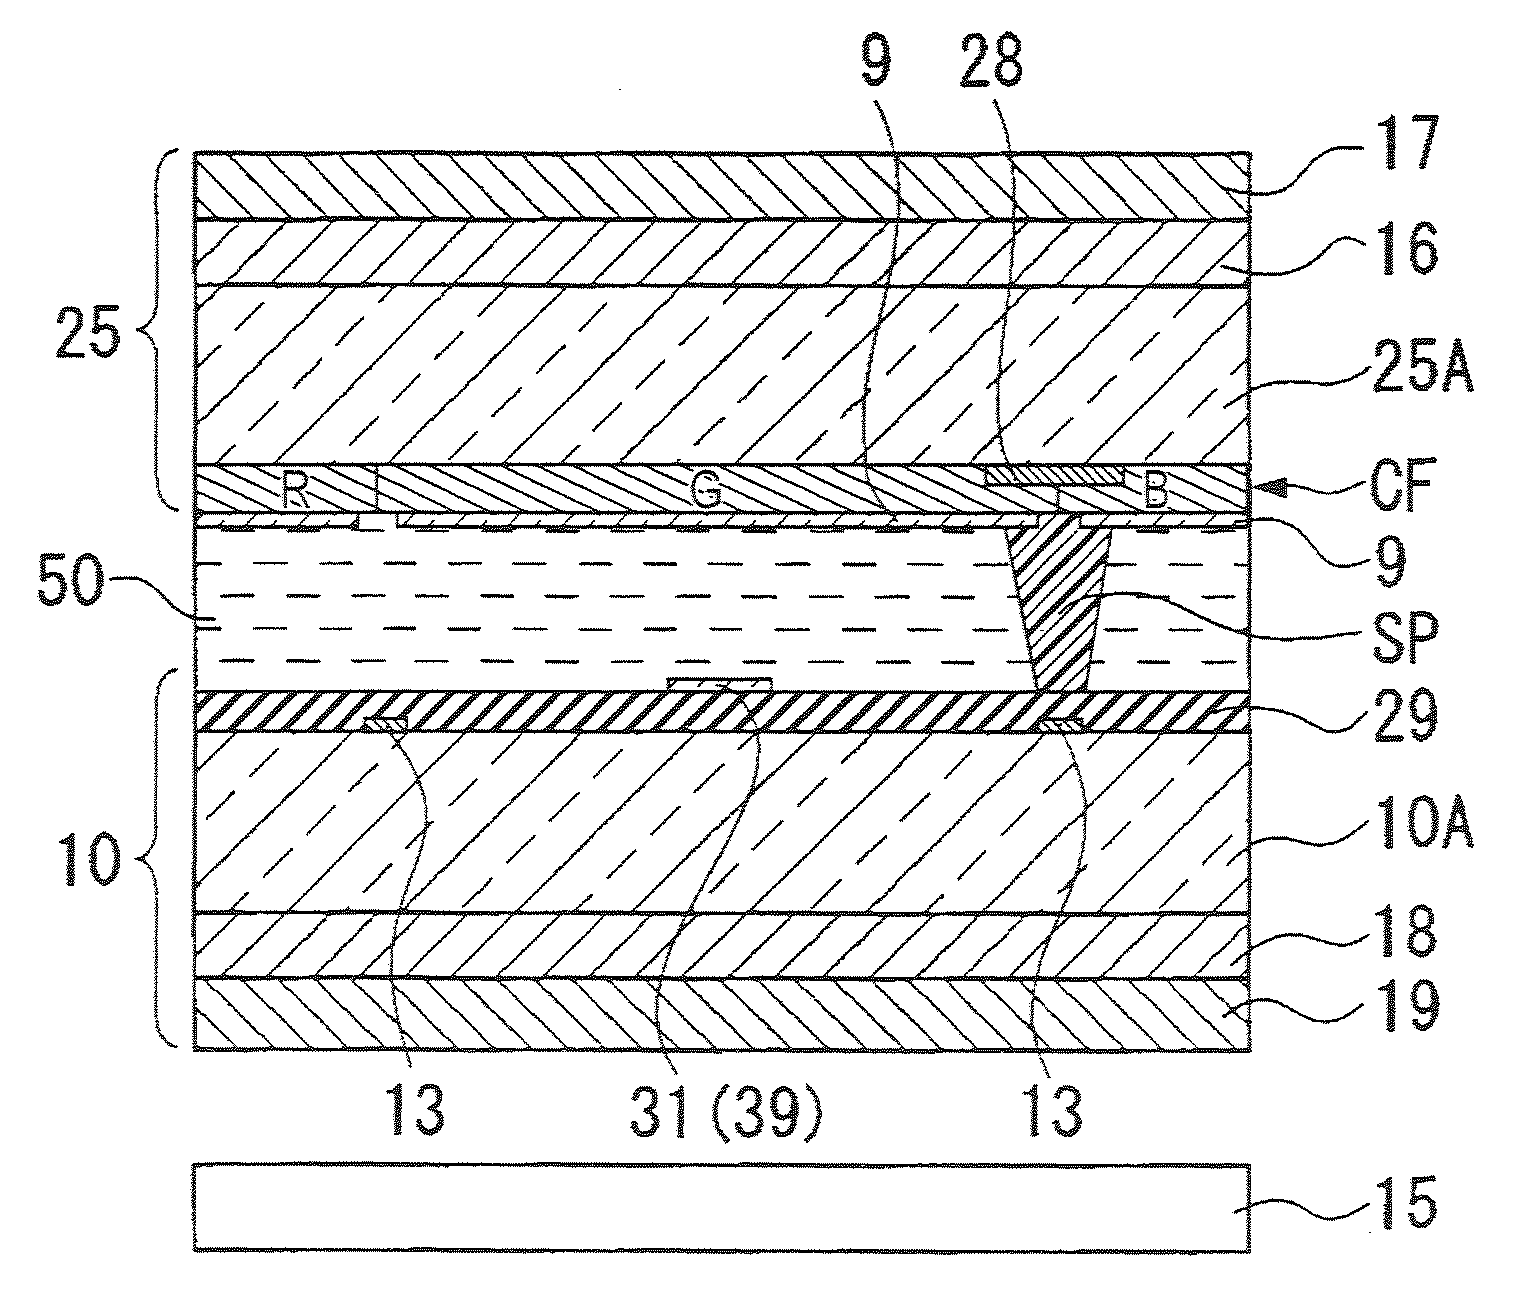 Liquid crystal display device and electronic apparatus